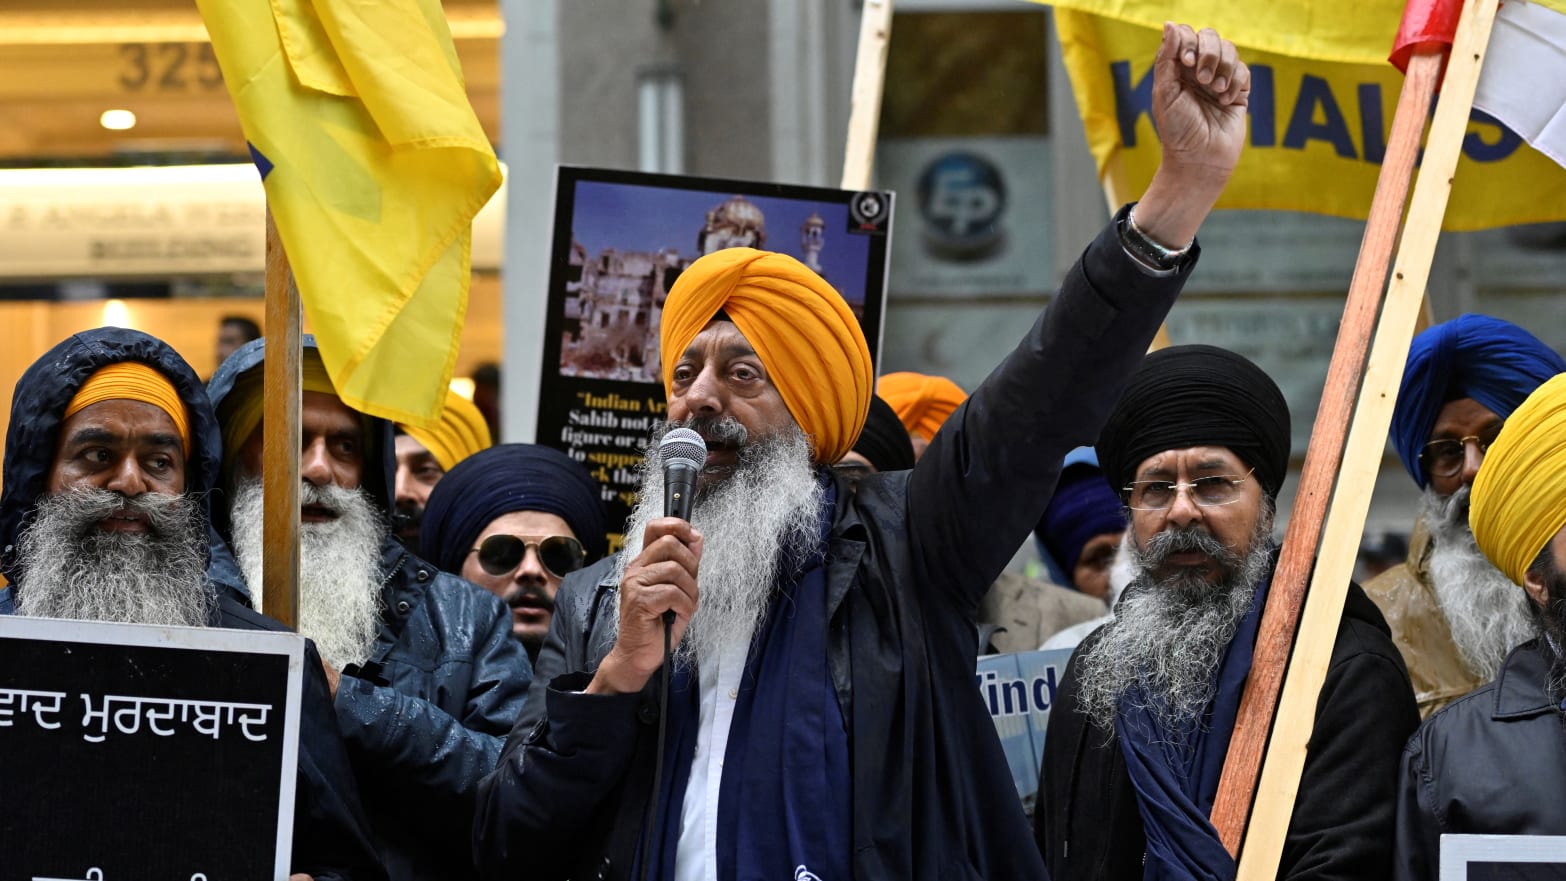 Demonstrators advocating for the creation of Khalistan rally in the street.